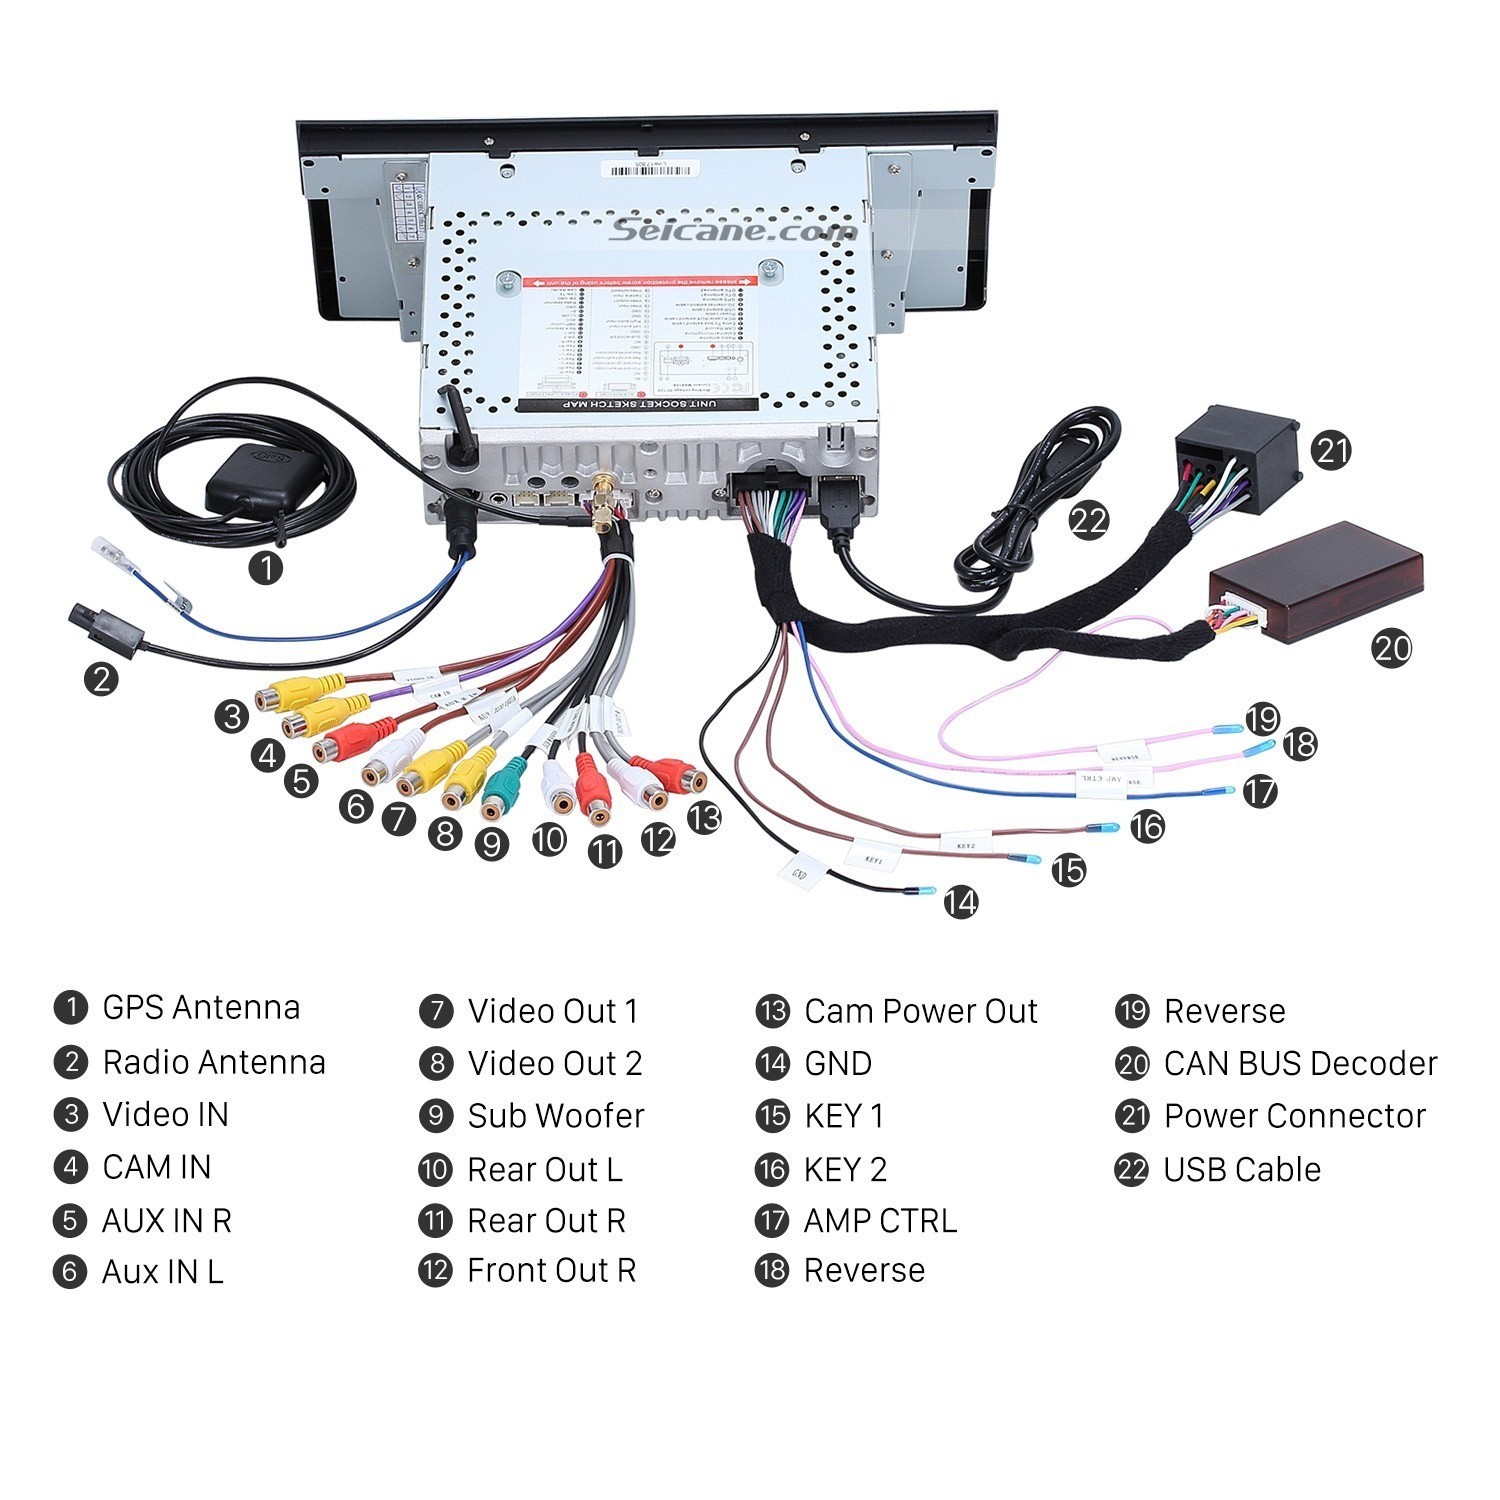 Wiring Diagram Car Stereo Amplifier Best Diagram A Car Best Car Parts and Diagrams Insignia Se